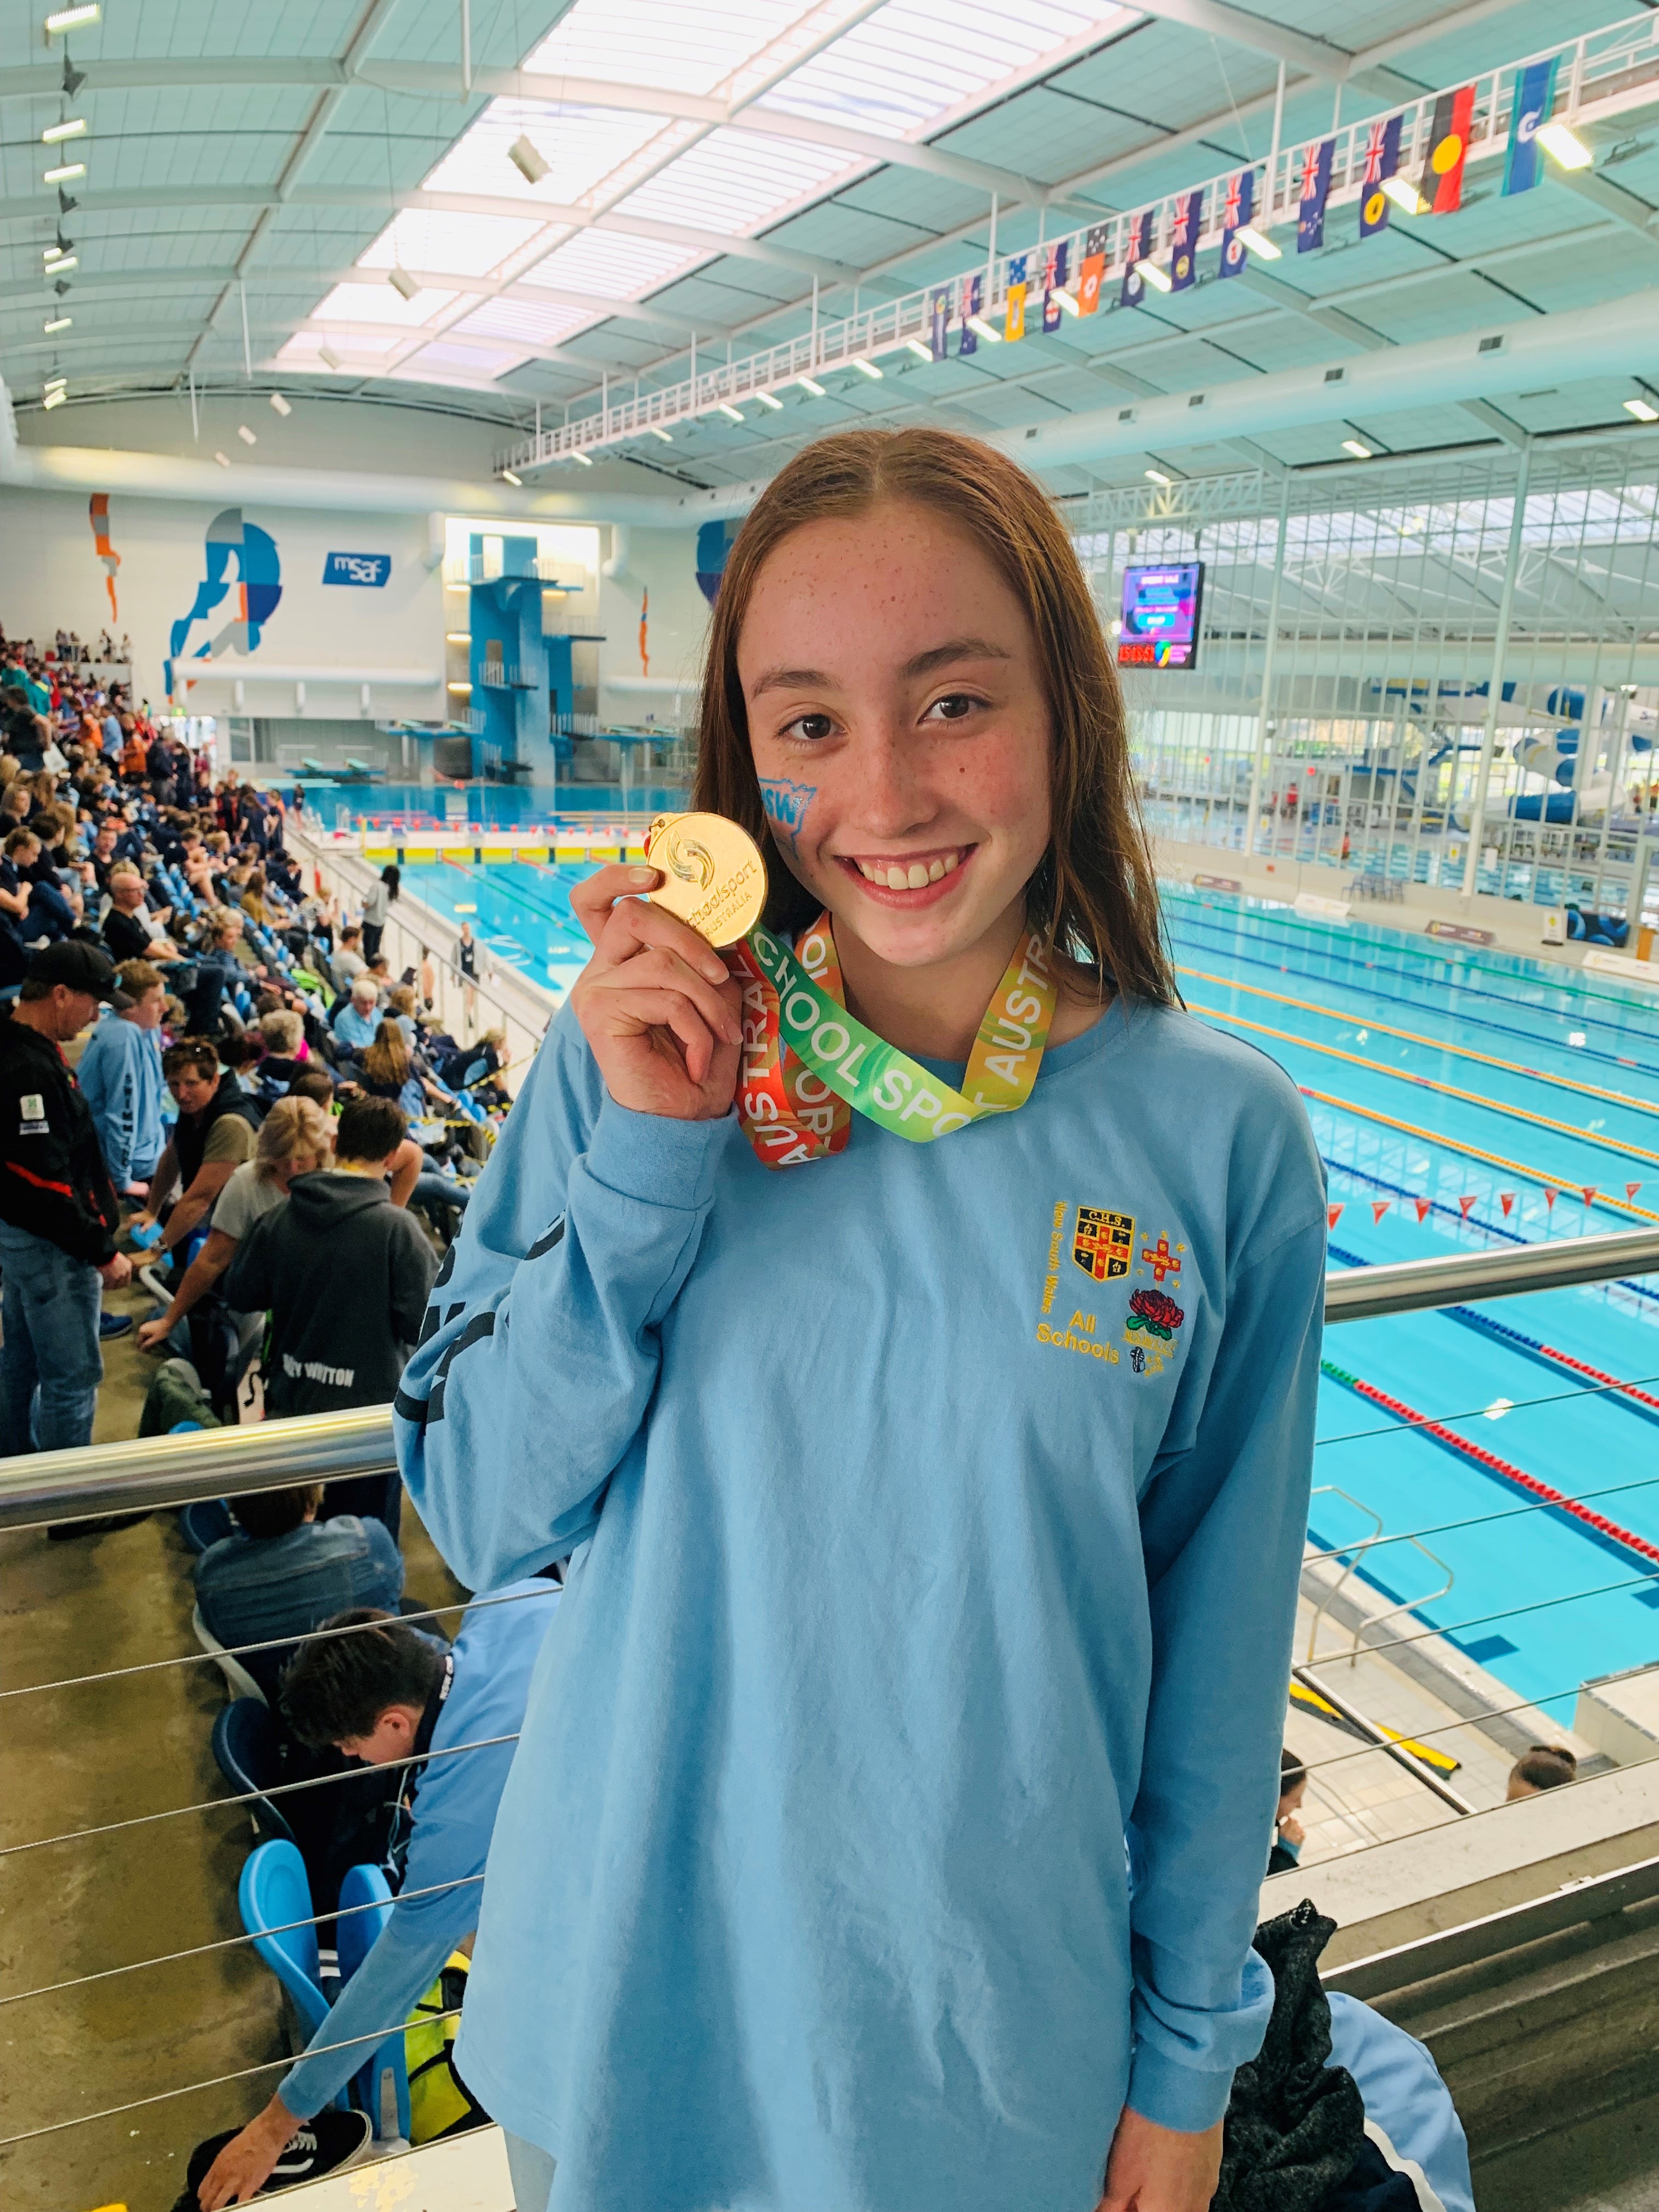 Natalie Wins Gold at the National Swimming Championships